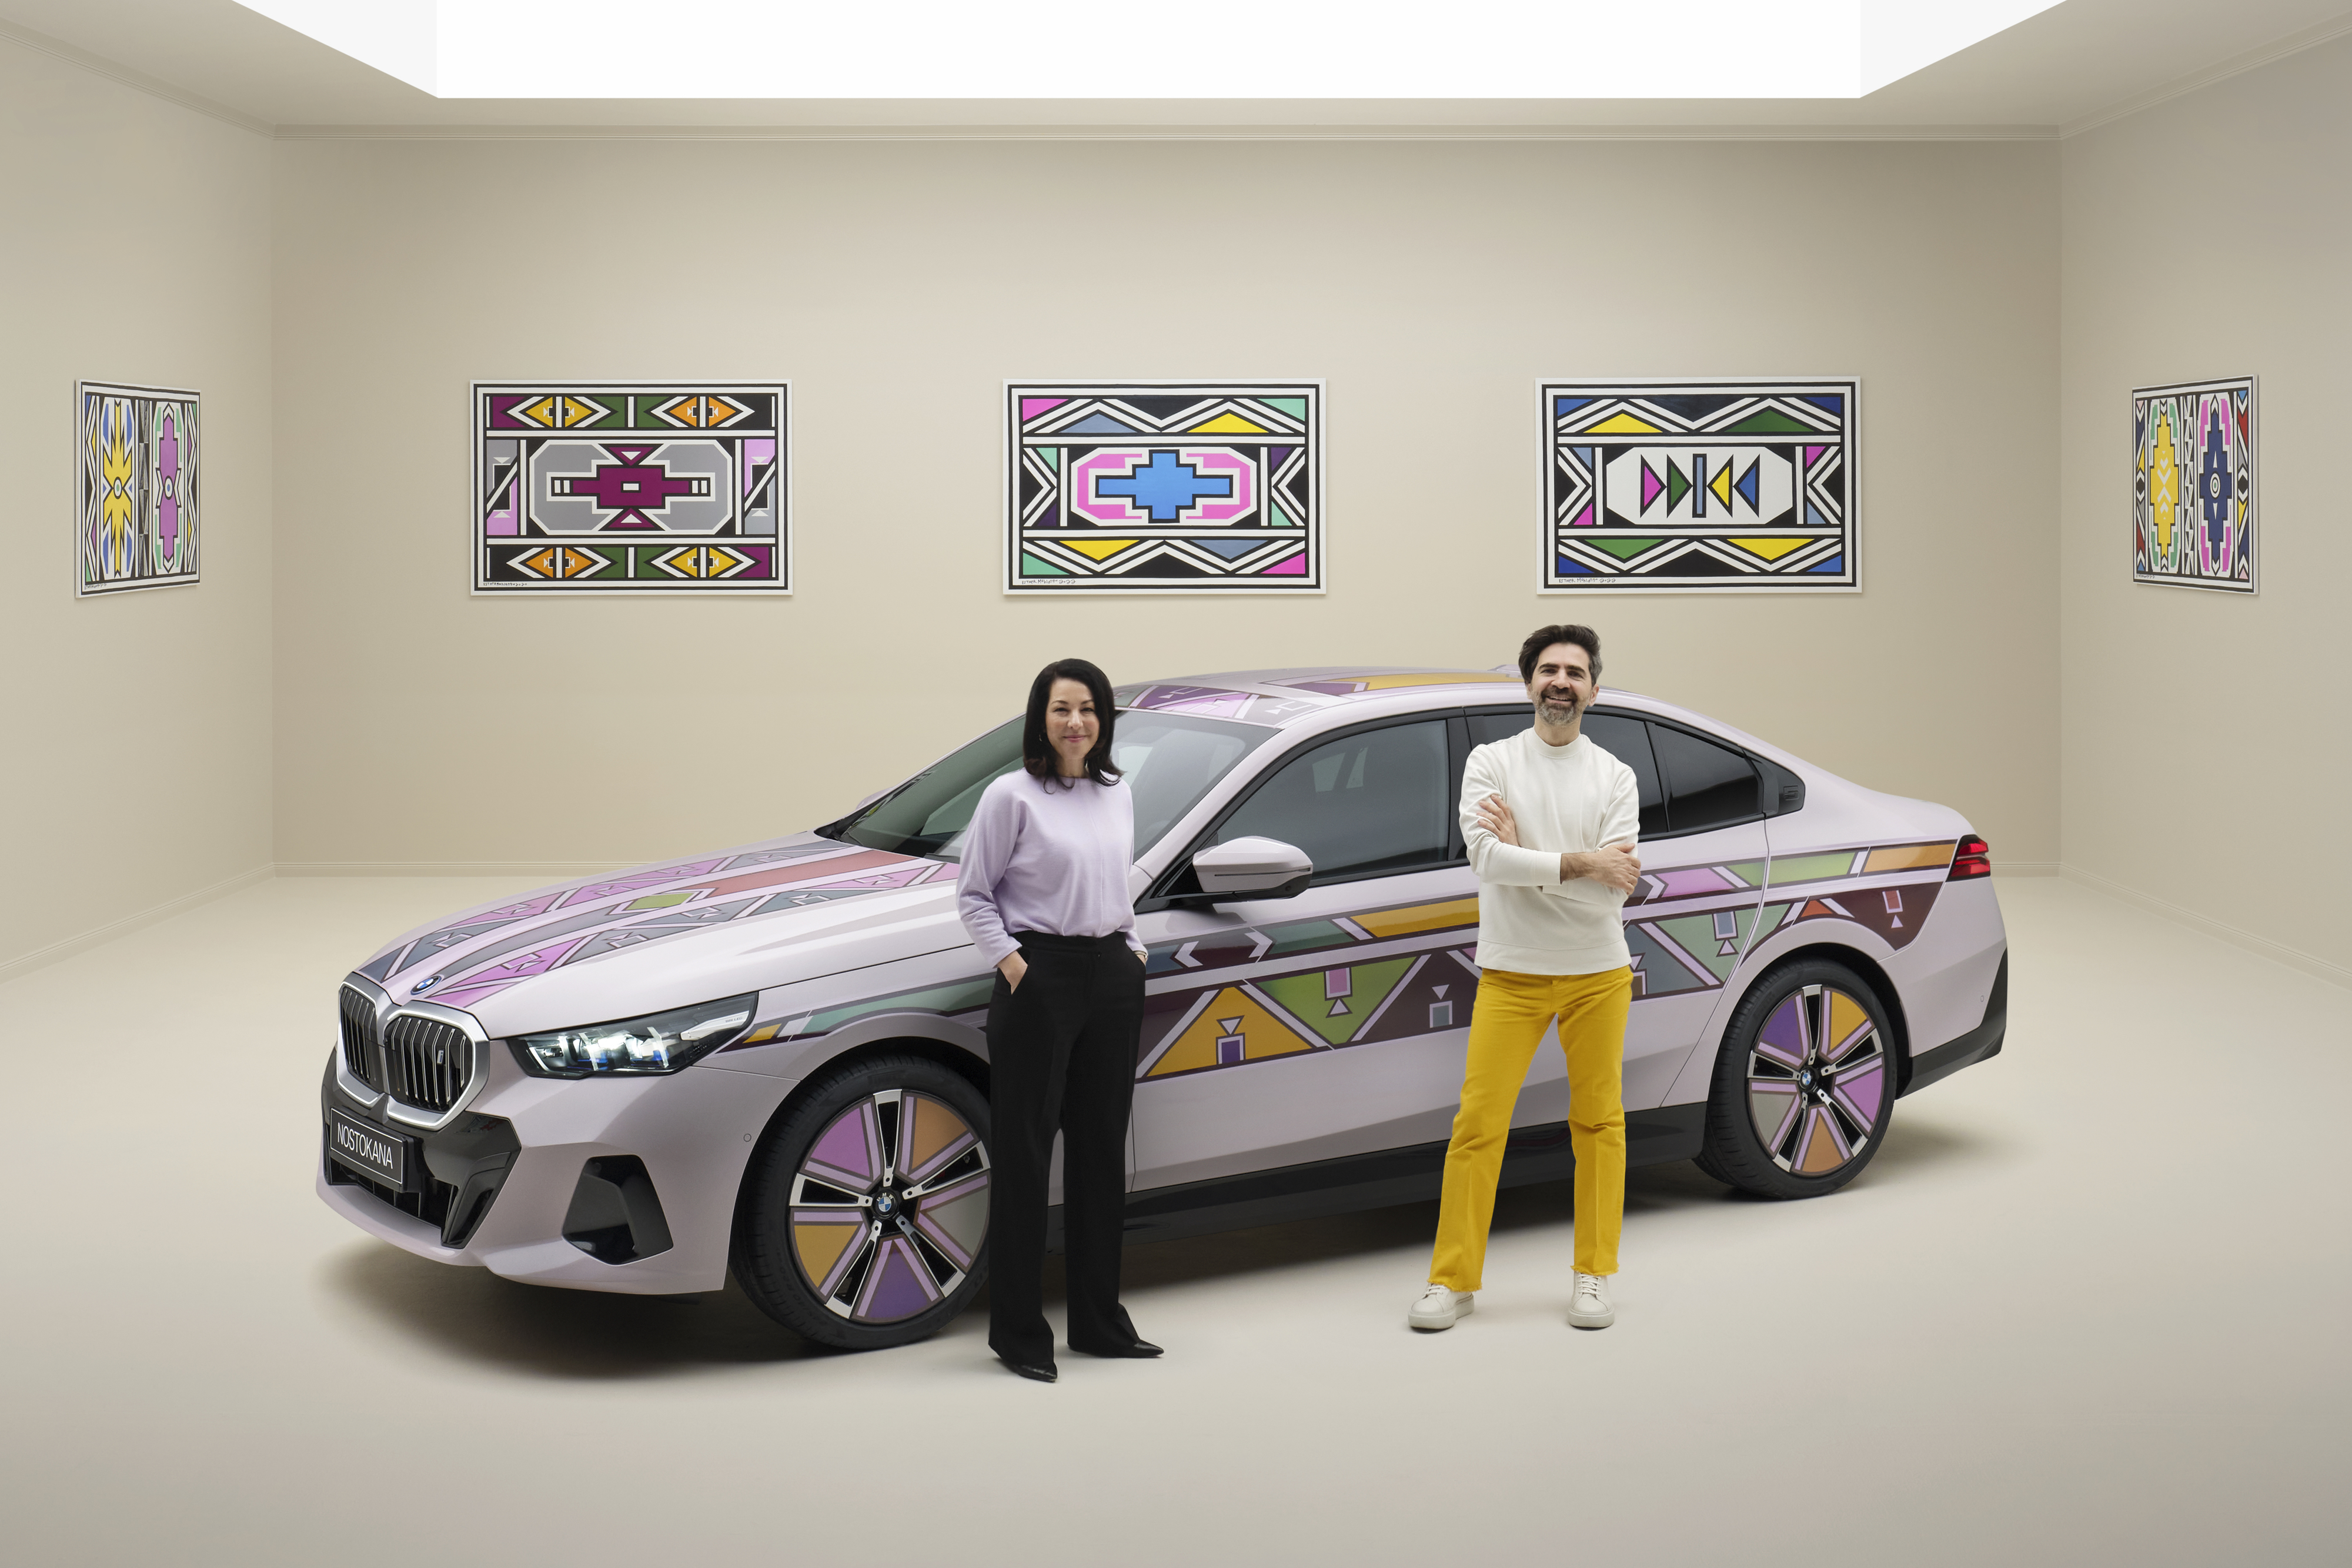 Two people standing beside a custom-painted car with geometric art on the walls, reflecting a contemporary style